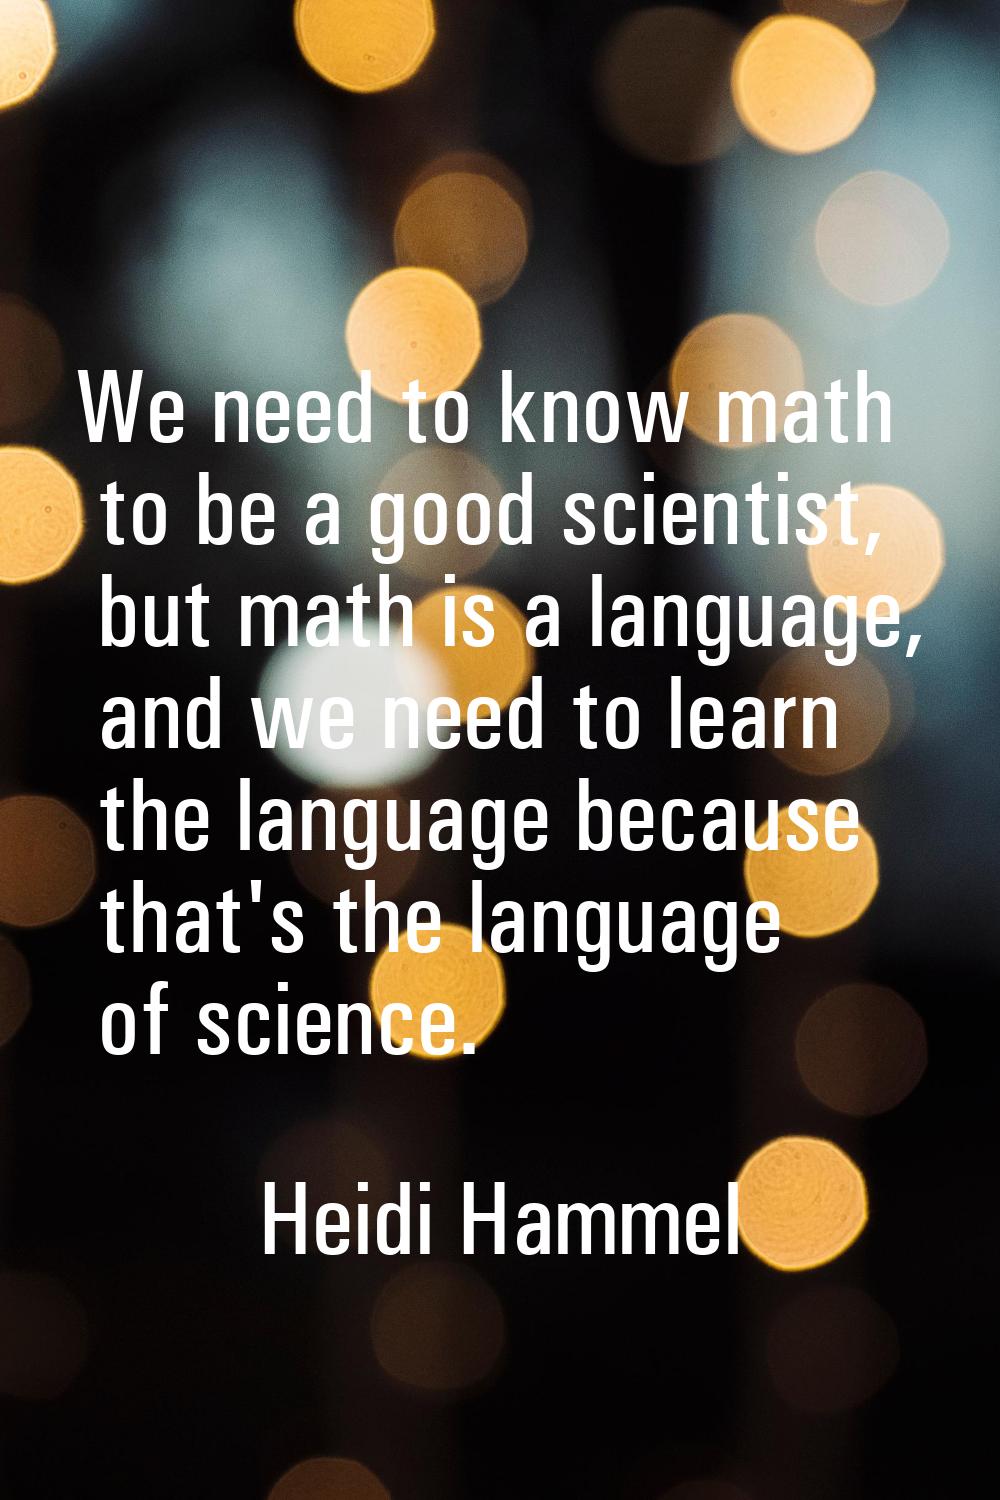 We need to know math to be a good scientist, but math is a language, and we need to learn the langu